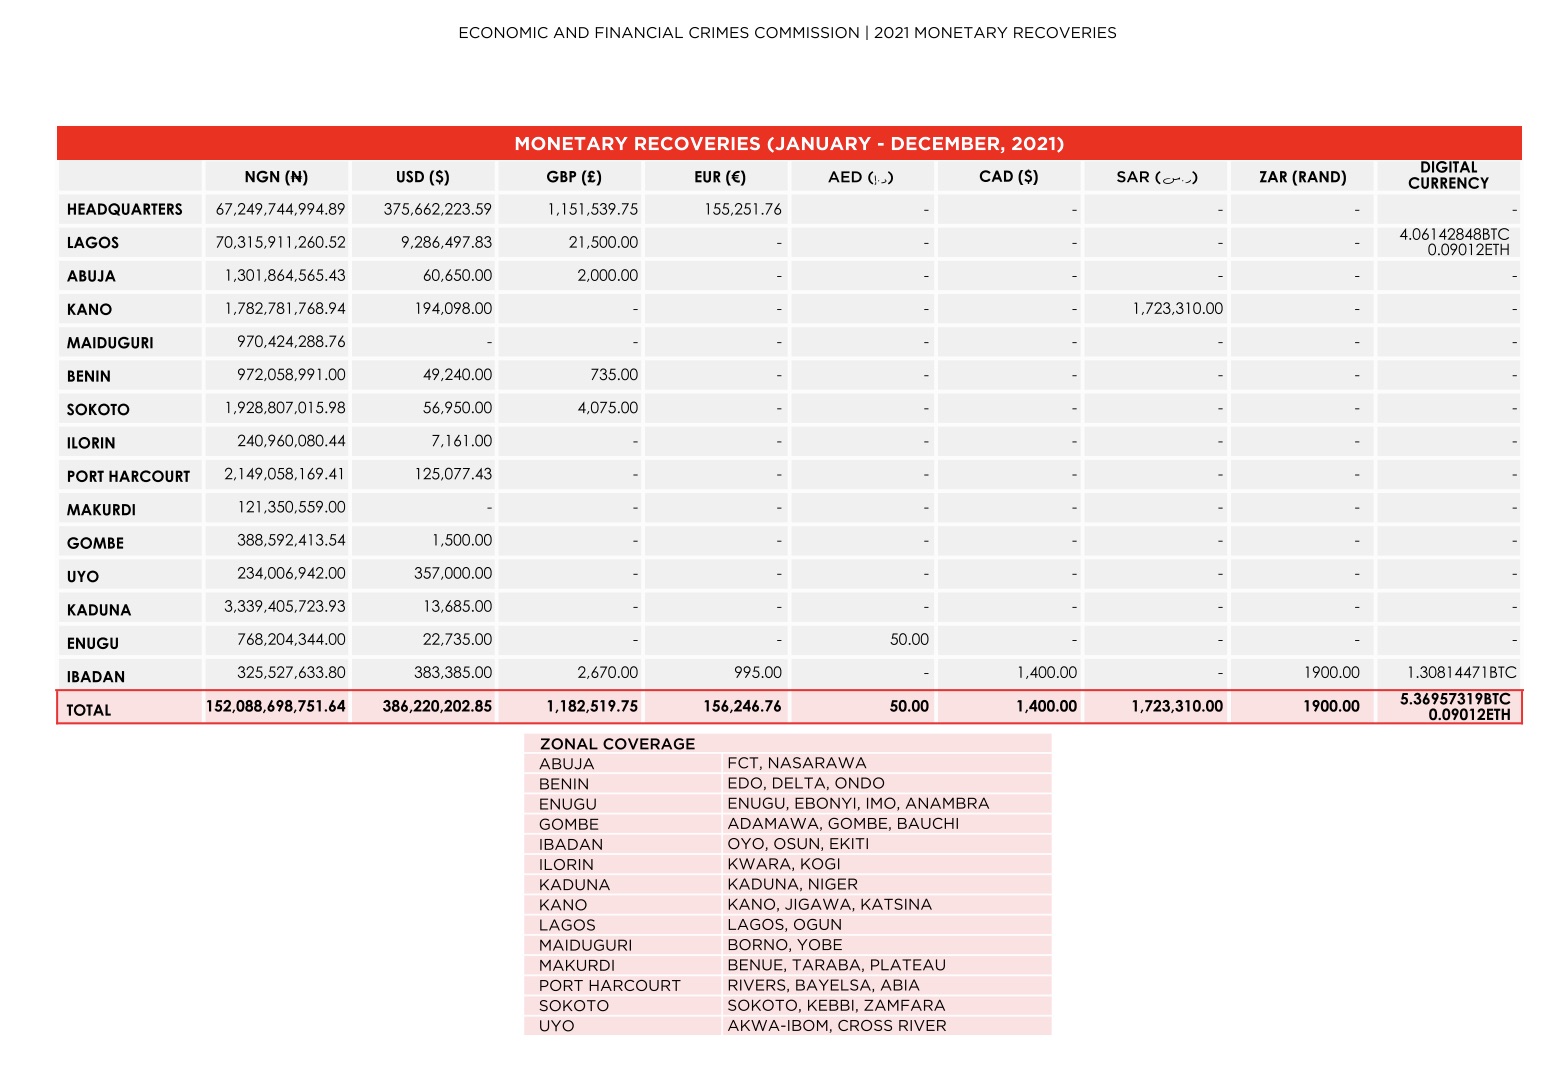 EFCC recoveries in 2021 Part 2